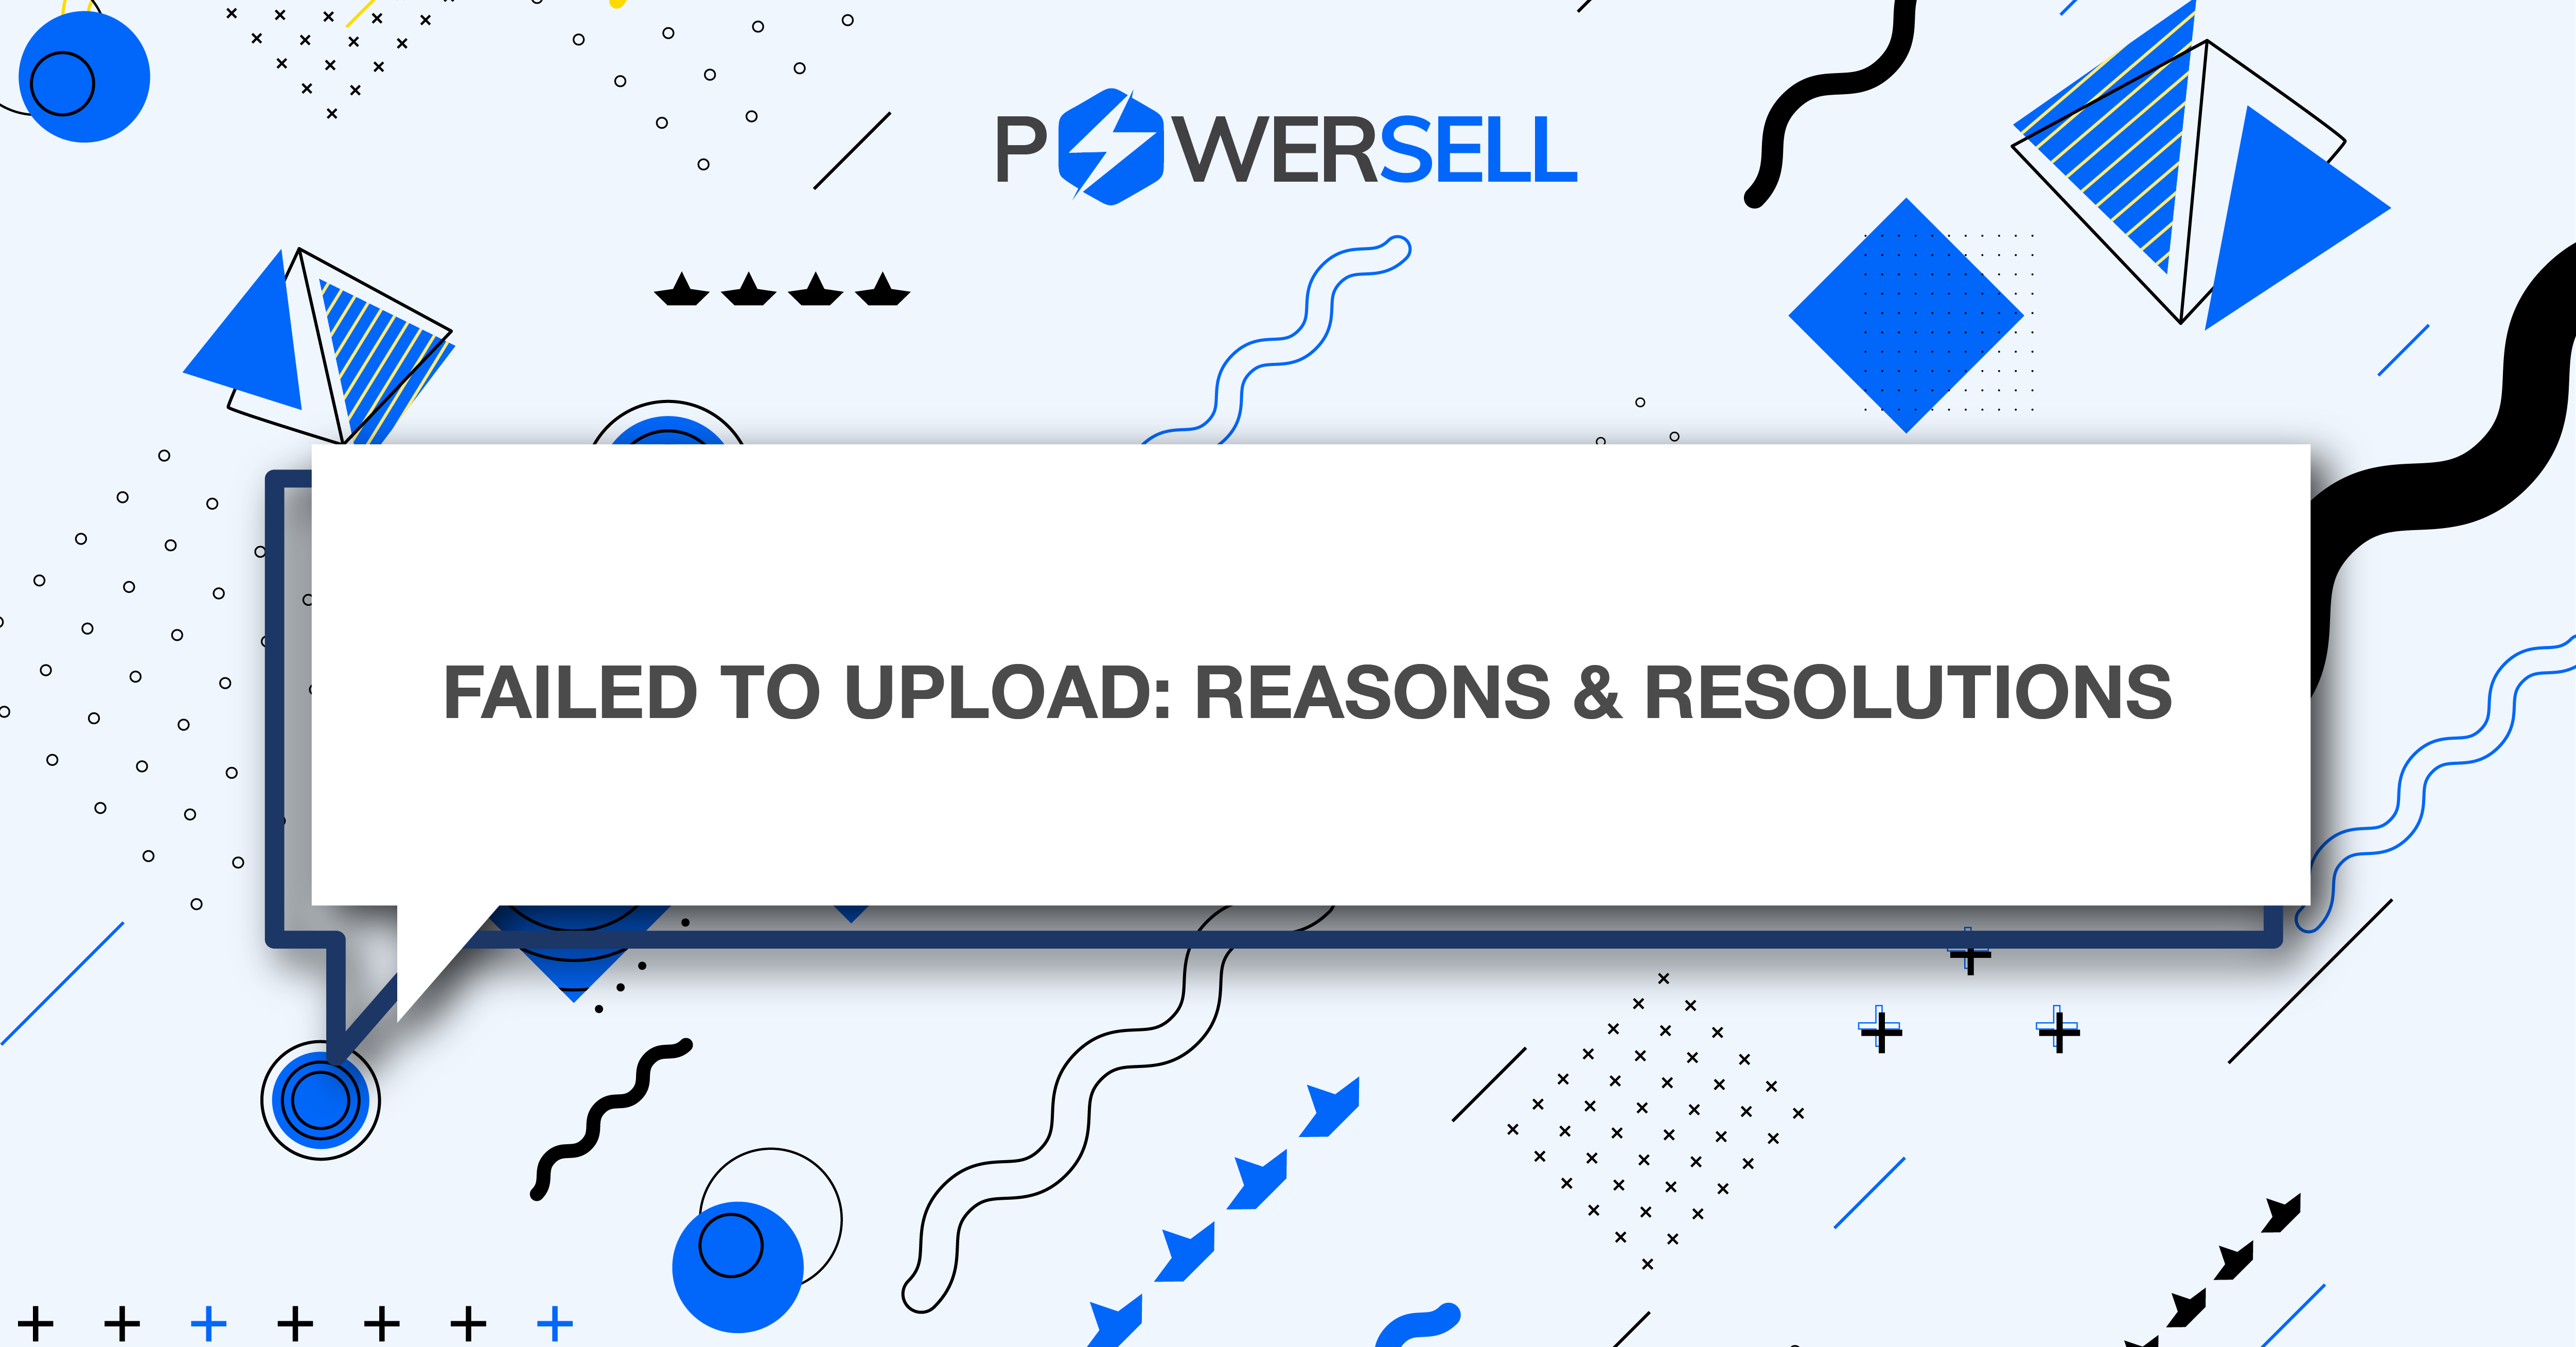 Failed to upload- Reasons & resolutions